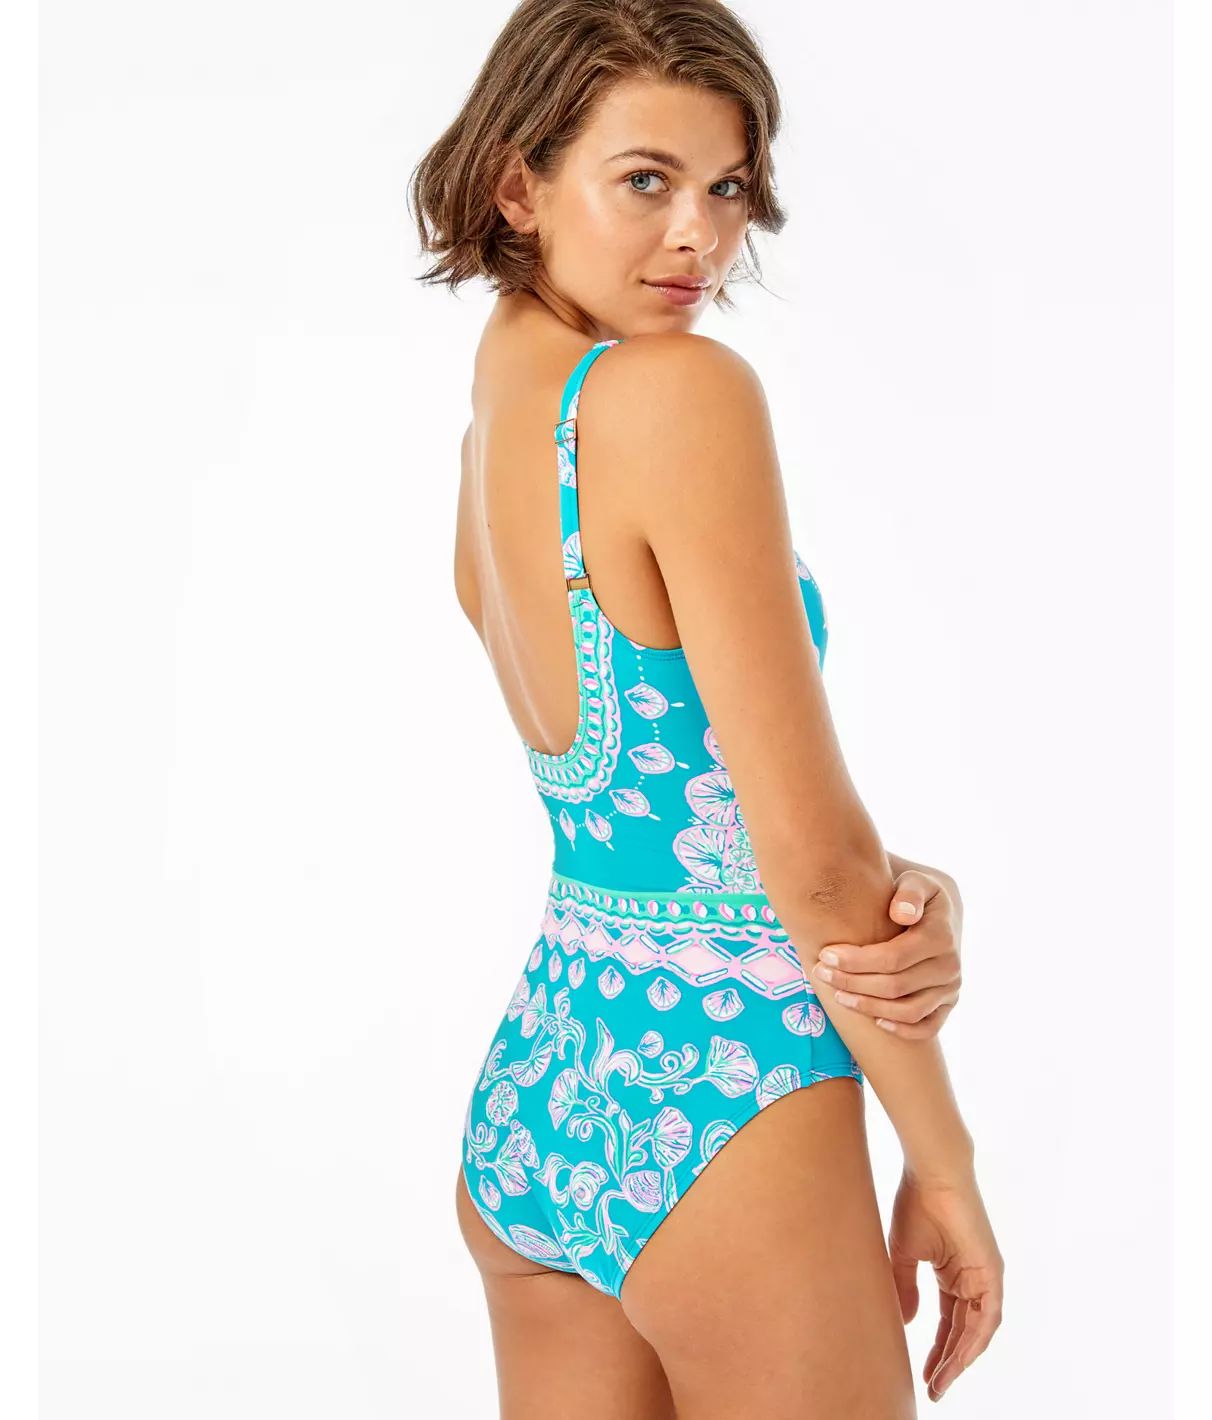 Shiloh One-Piece Swimsuit | Lilly Pulitzer